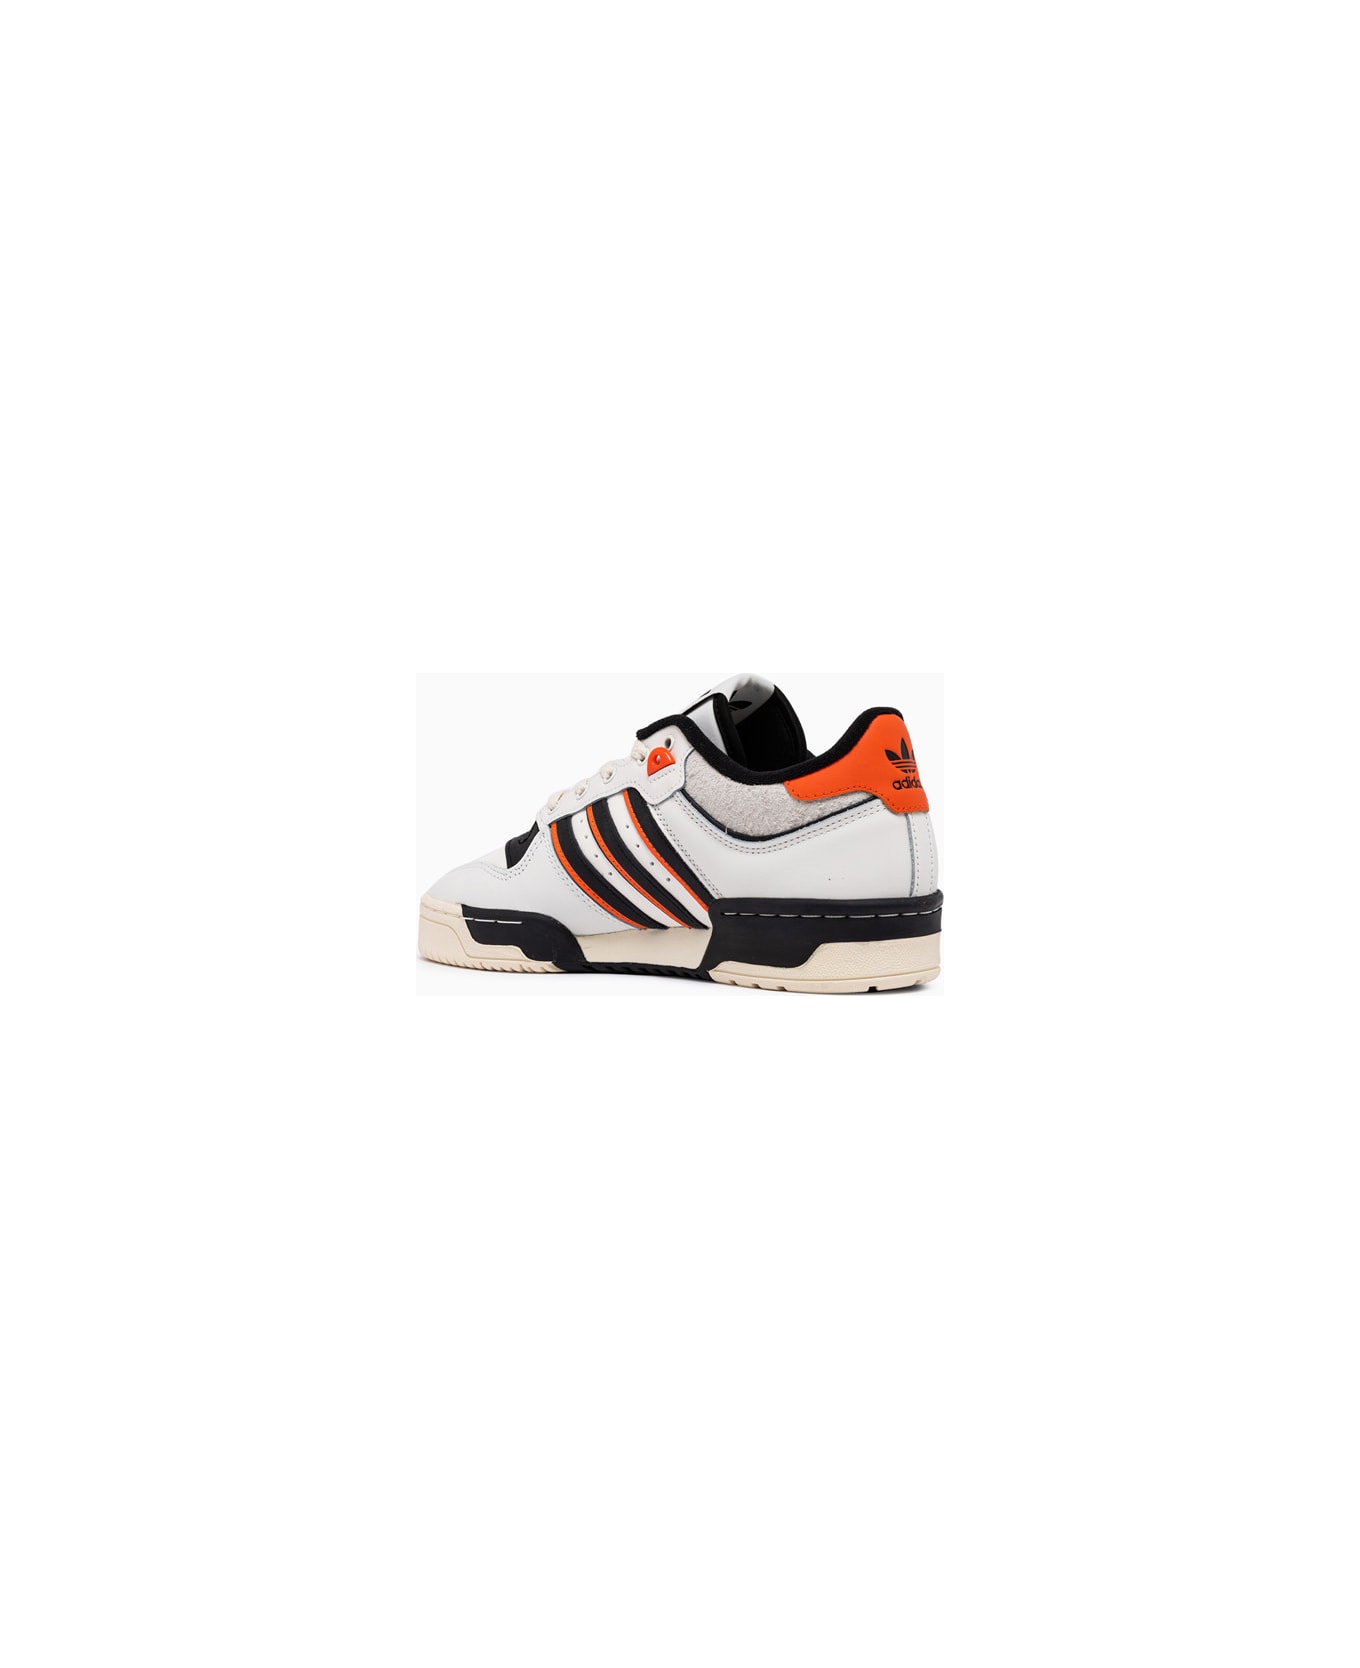 Adidas Rivalry 86 Low Sneakers Ie7140 - WHITE